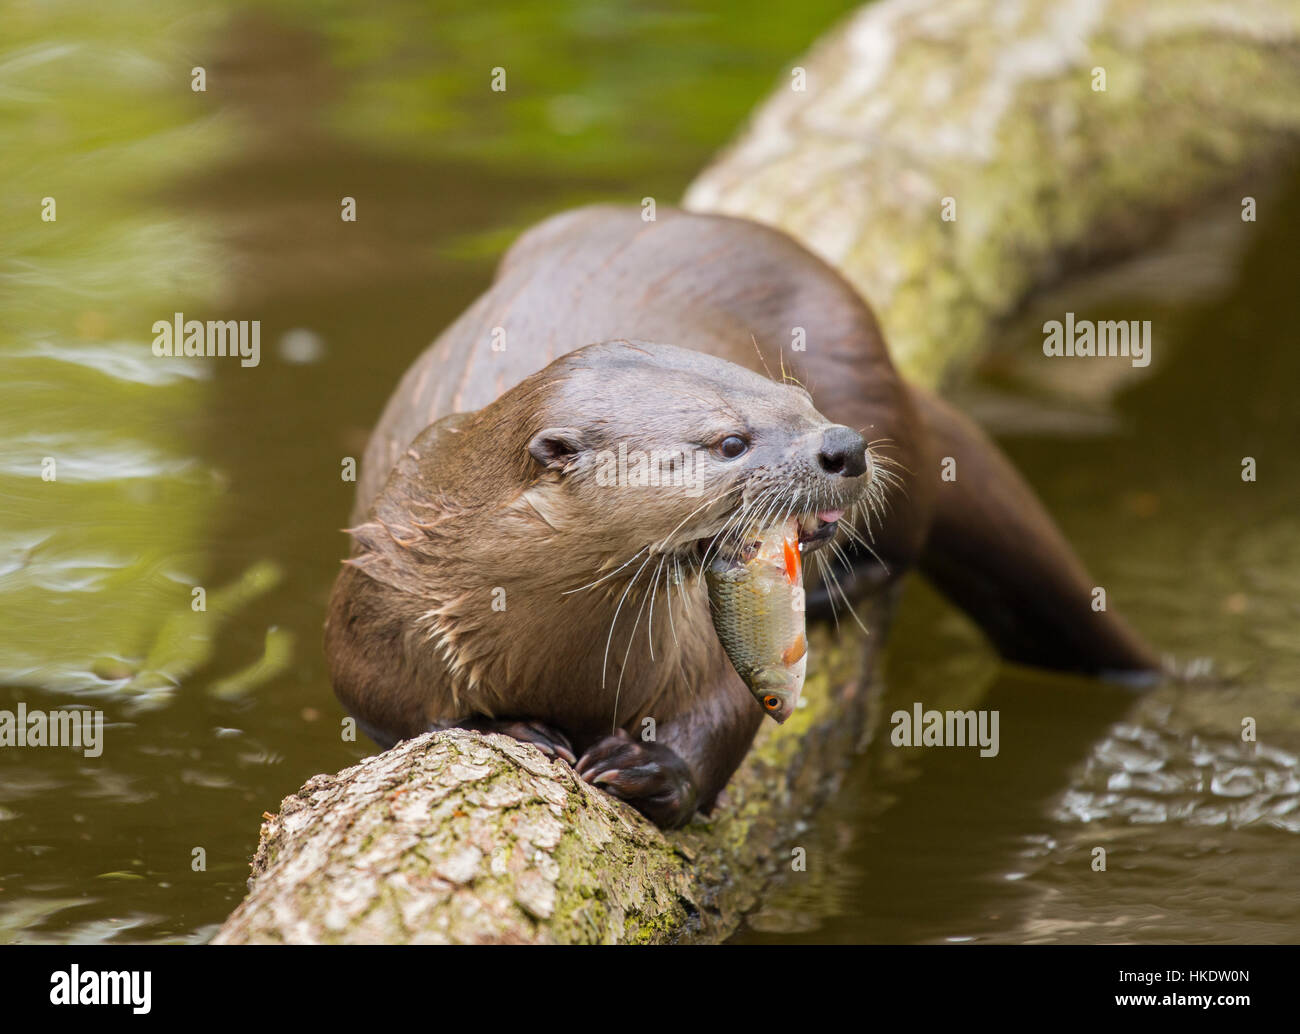 Common otter (Lutra lutra) with seized fish, captive, Germany Stock Photo